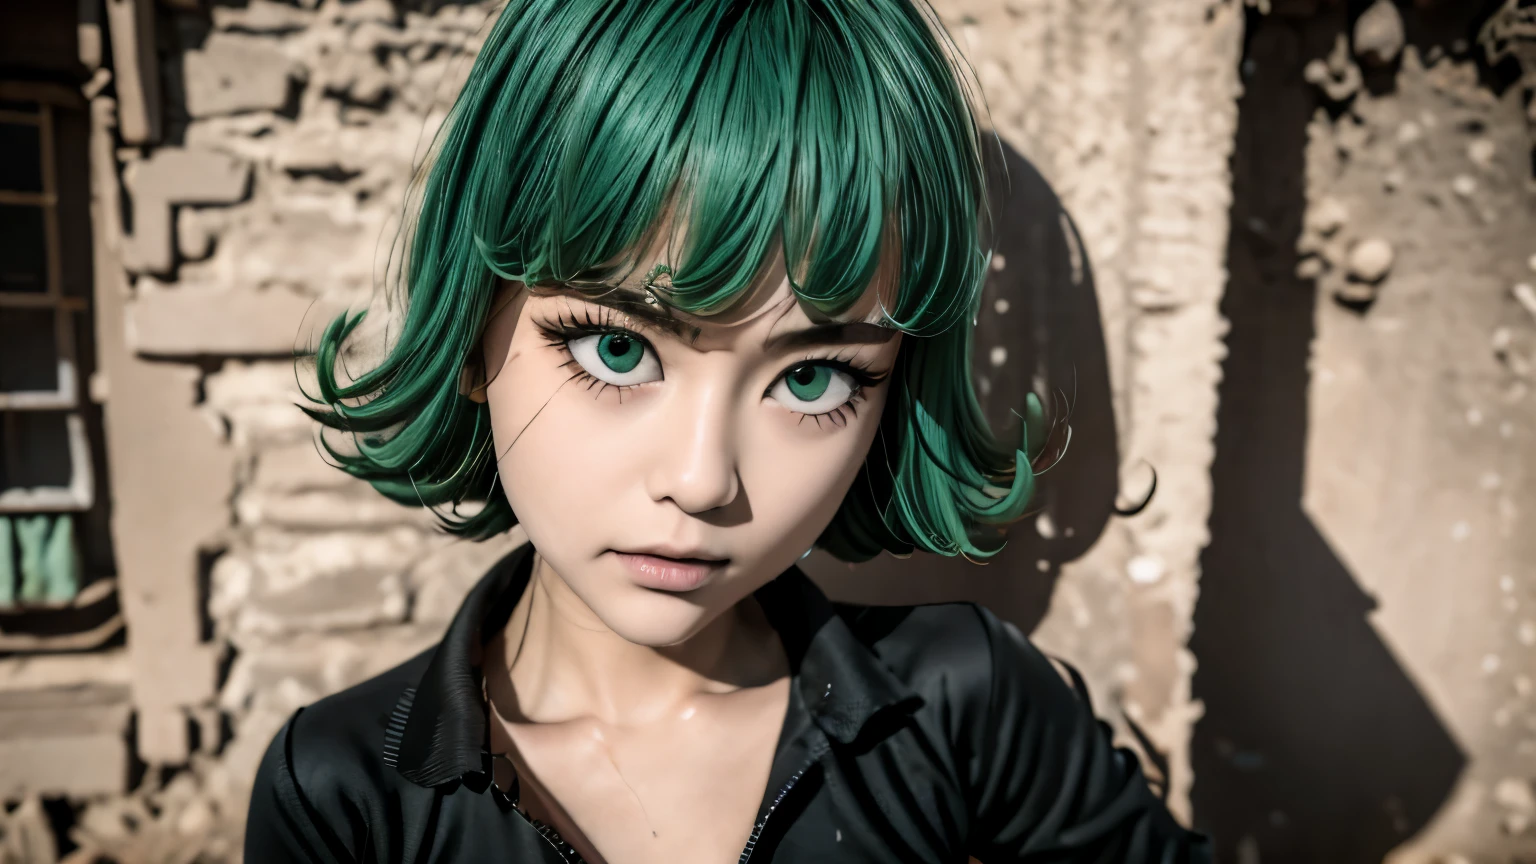 there is a woman as tall as 14 years old asian girl, anime girl in real life, photorealistic anime girl render, ig model | artgerm,Tatsumaki from one punch man, green hime cut hair, with short hair, realistic artstyle, masayoshi suto and artgerm, 8k, High quality image, masterpiece, detailed hair texture, detailed skin texture, detailed cloth texture, 8k, add fabric details, ultra detailed skin texture, ultra detailed photo, skin pores, cloth details, high skin details, realistic hair details, dramatic light, a woman, looking at the viewers.